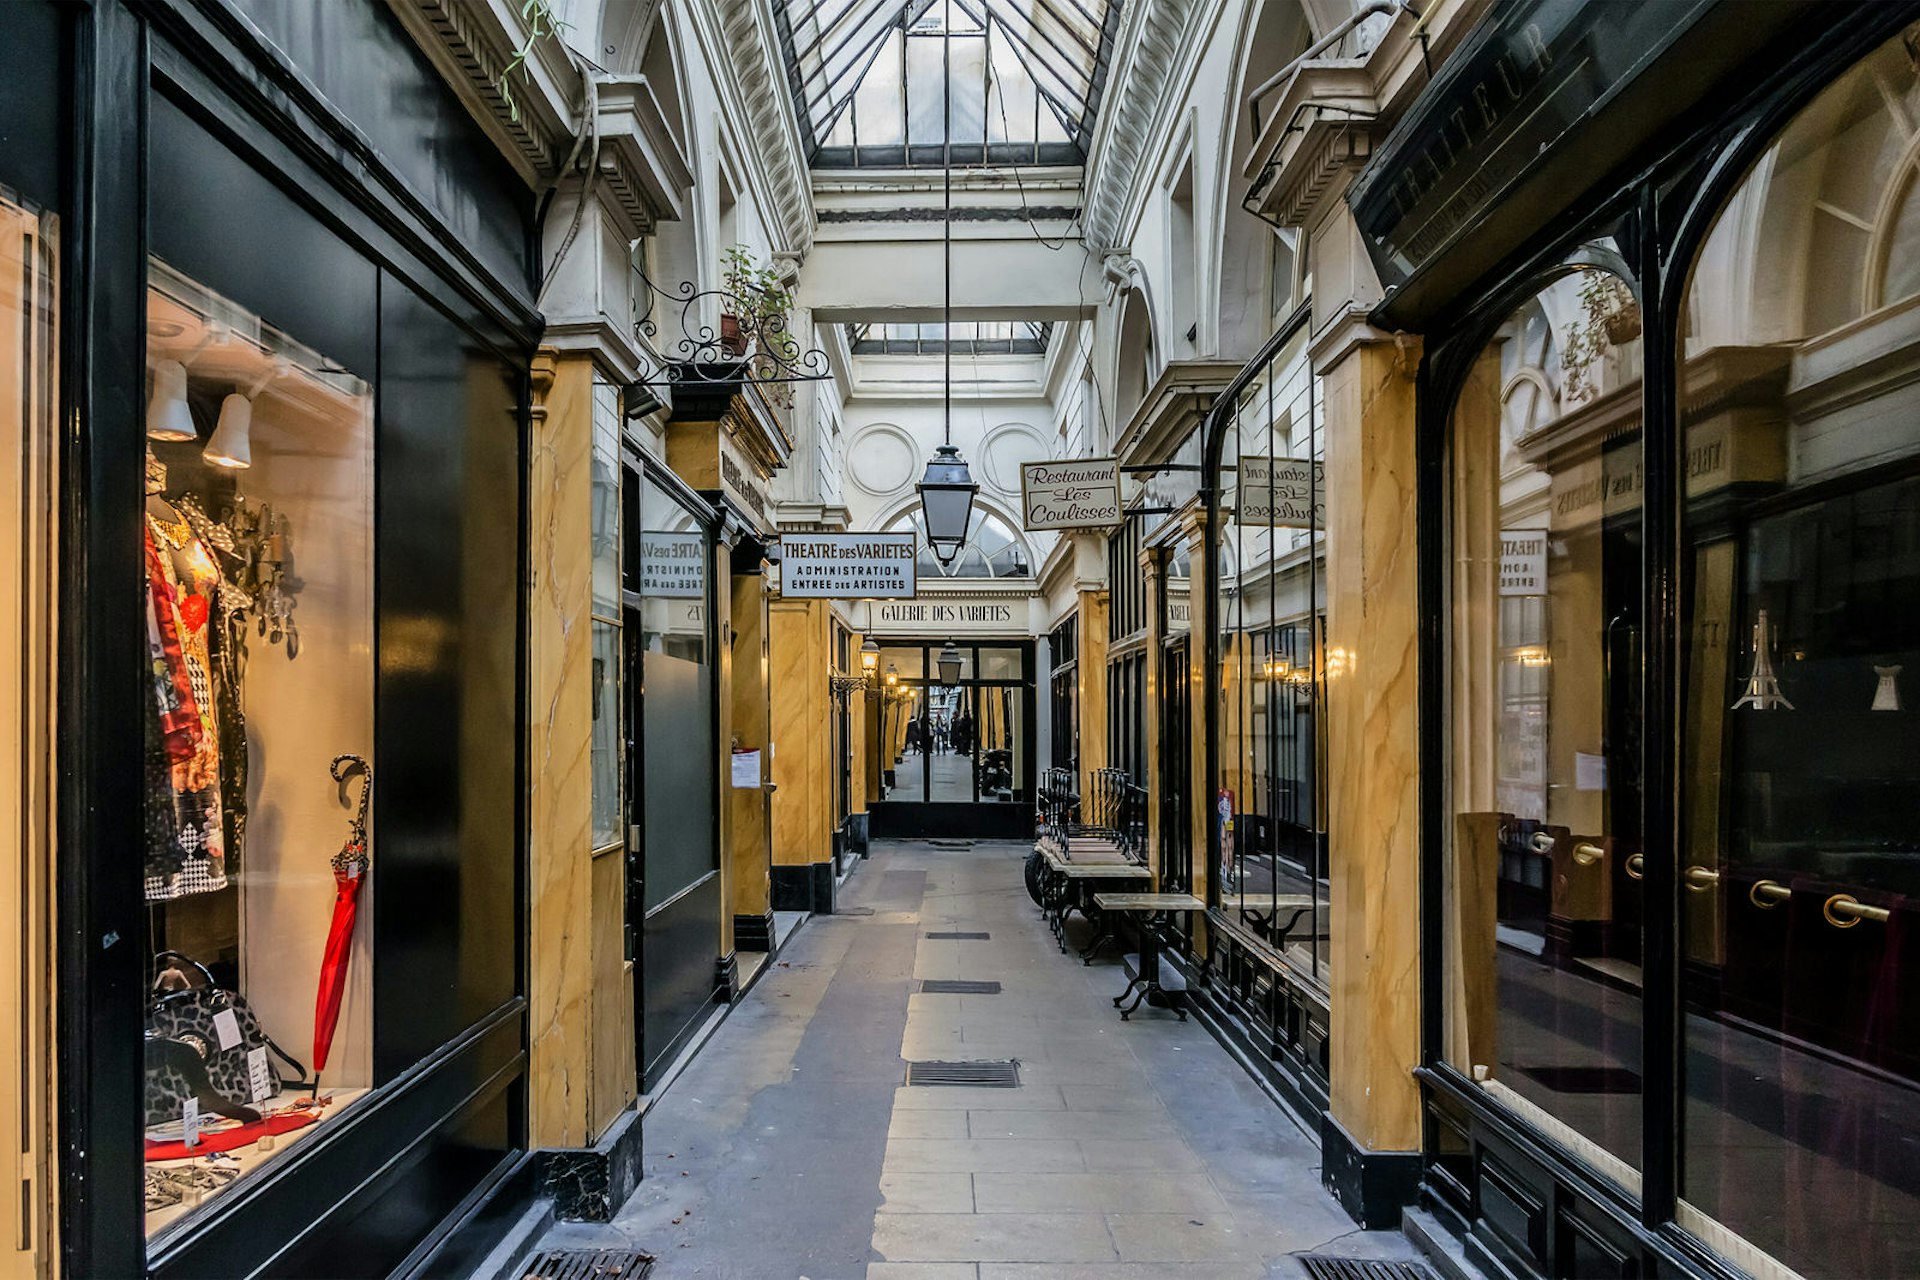 Narrow walkway through Passage des Panoramas, the oldest covered passageway in Paris